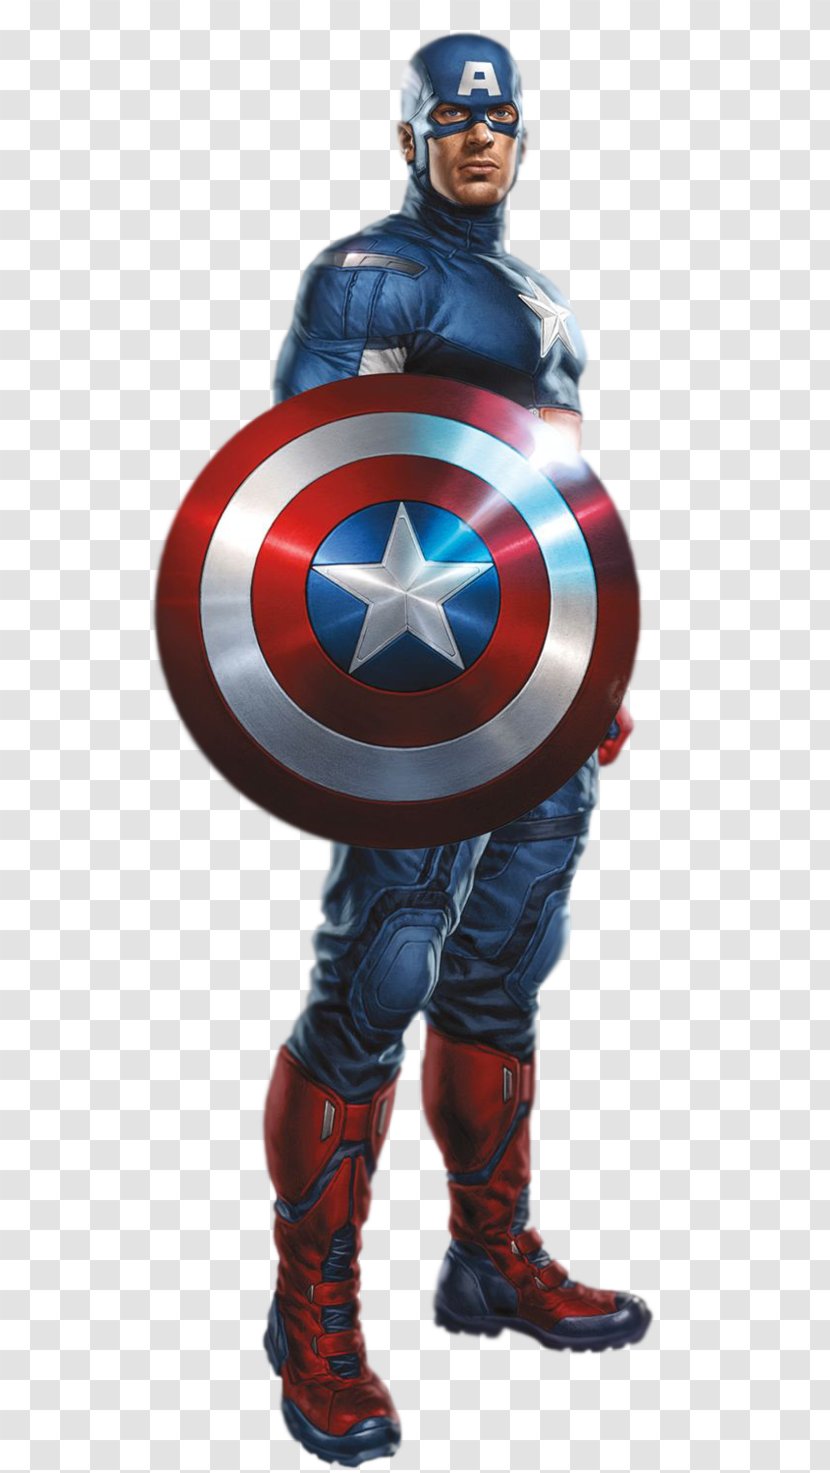 Captain America The Avengers Wall Decal Sticker Superhero Transparent PNG